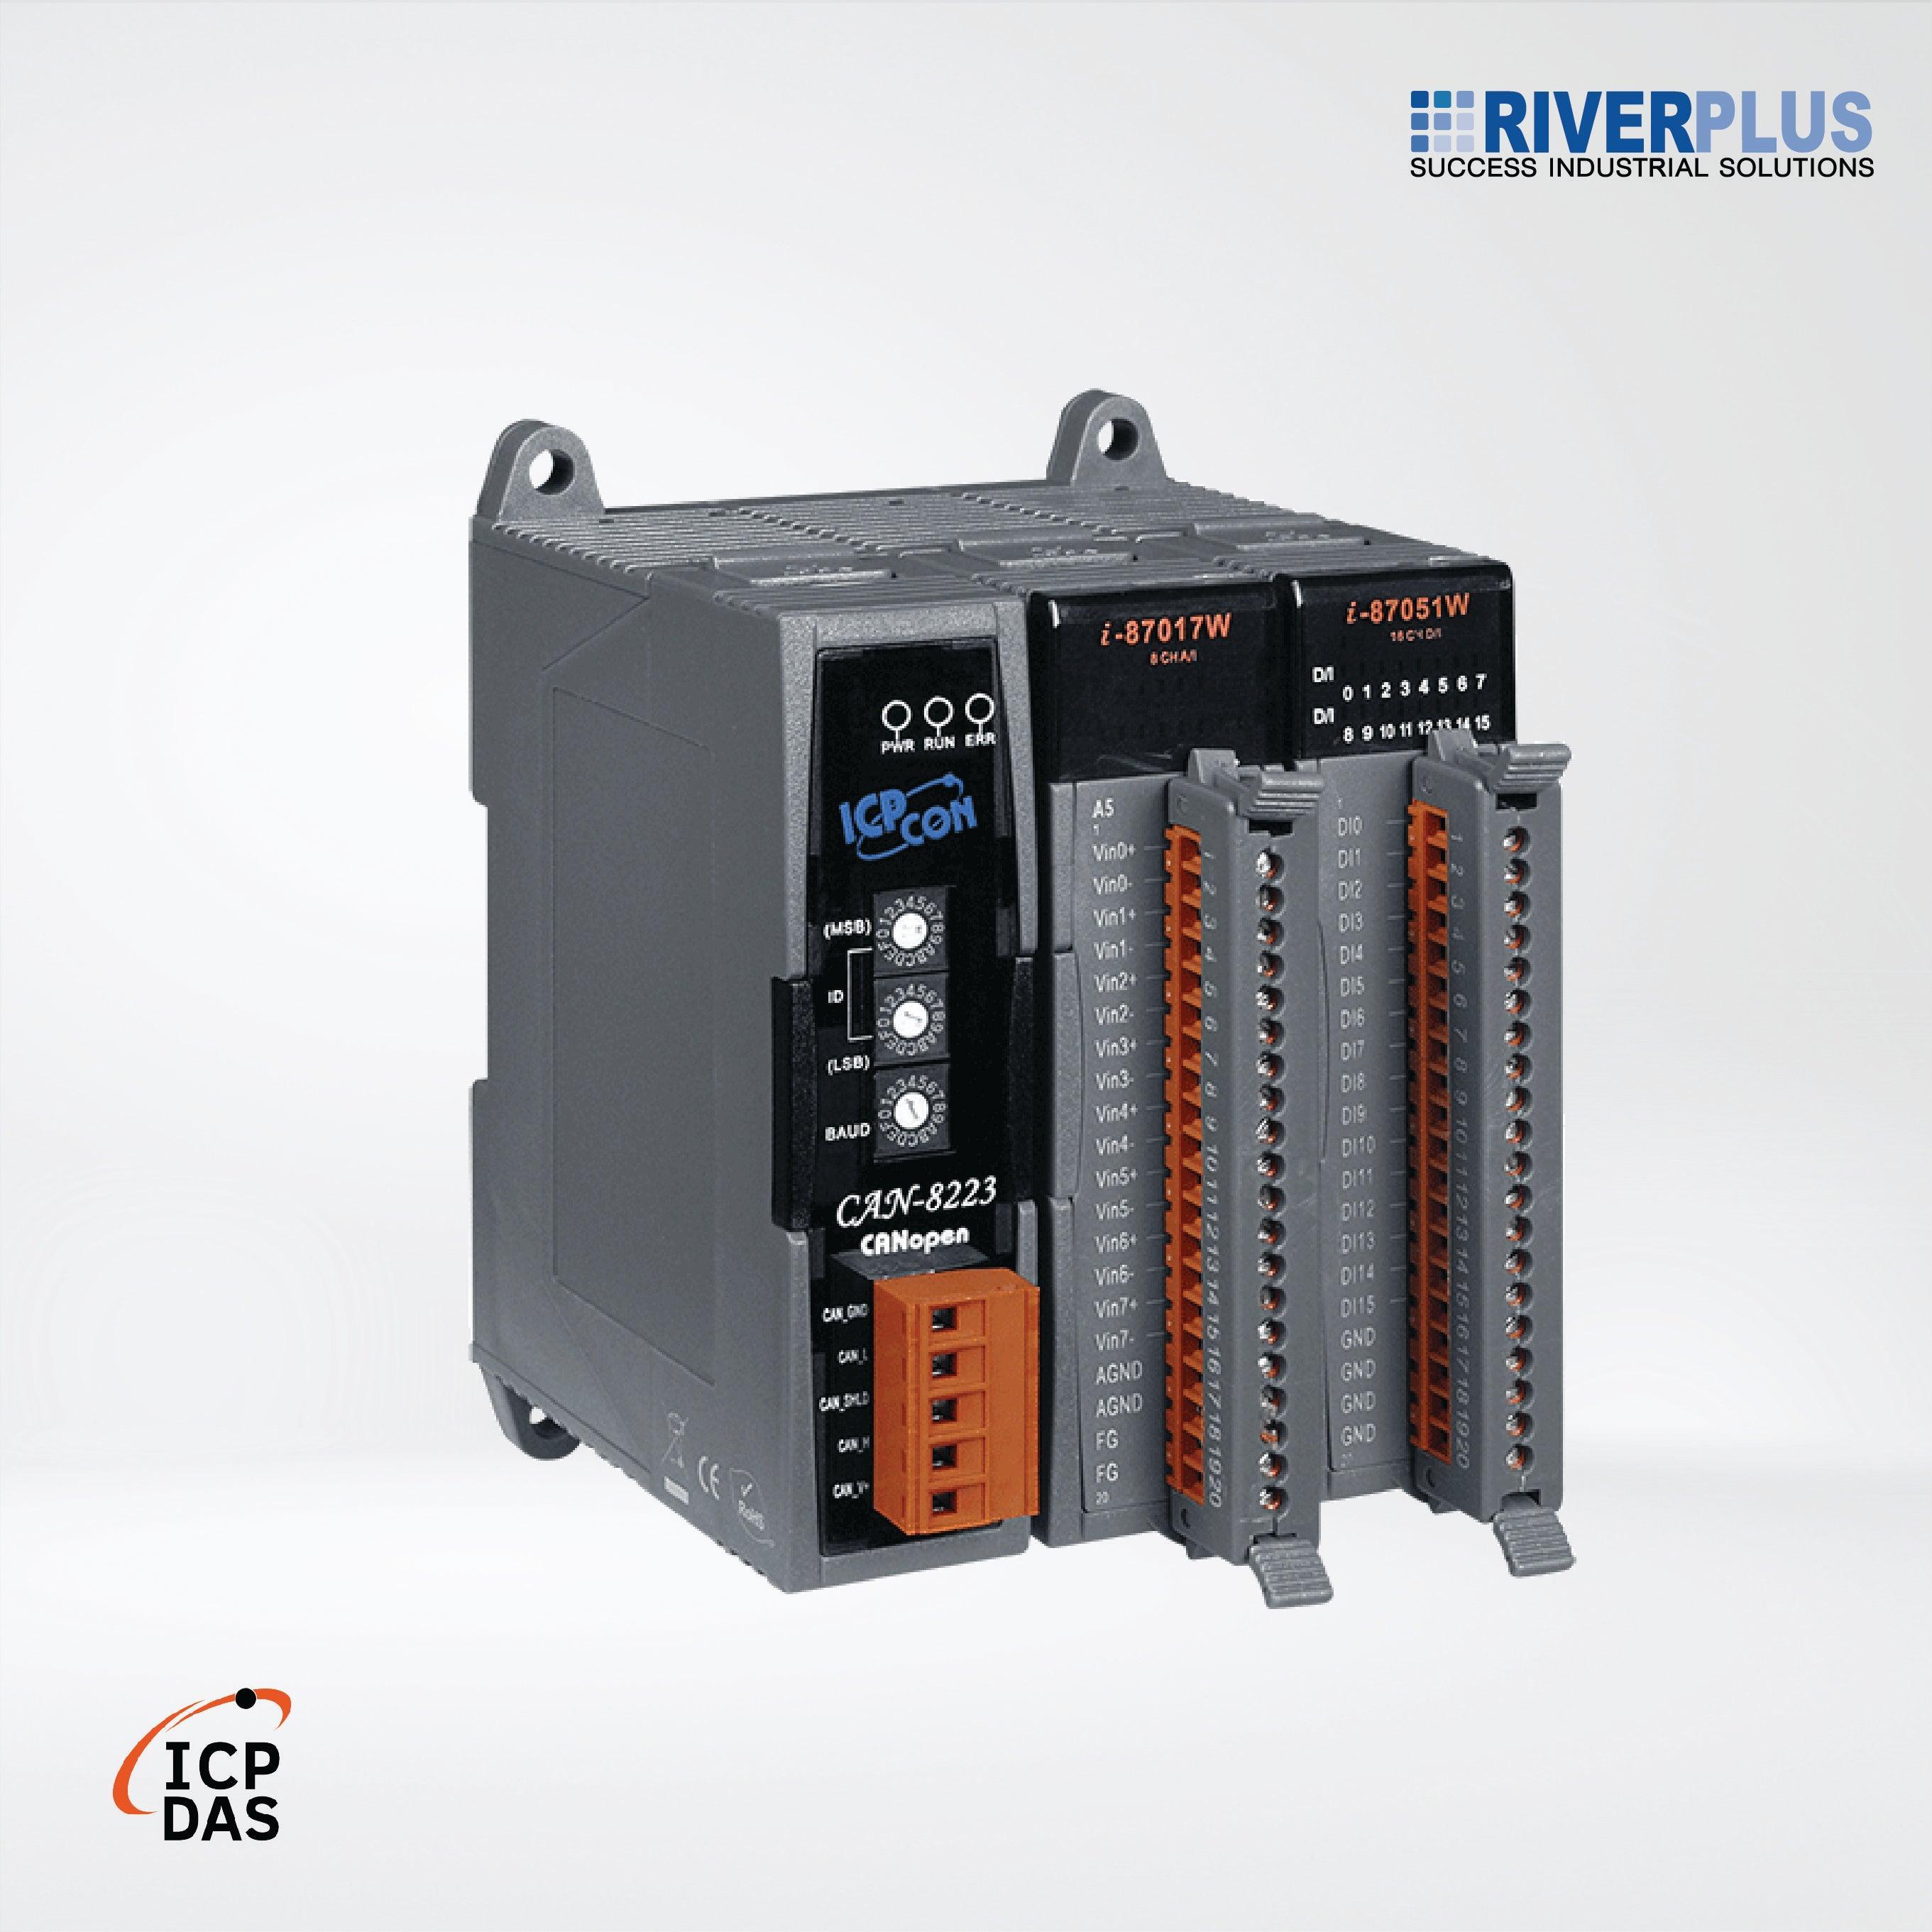 CAN-8223-G CANopen Remote I/O Unit with 2 I/O Slots - Riverplus